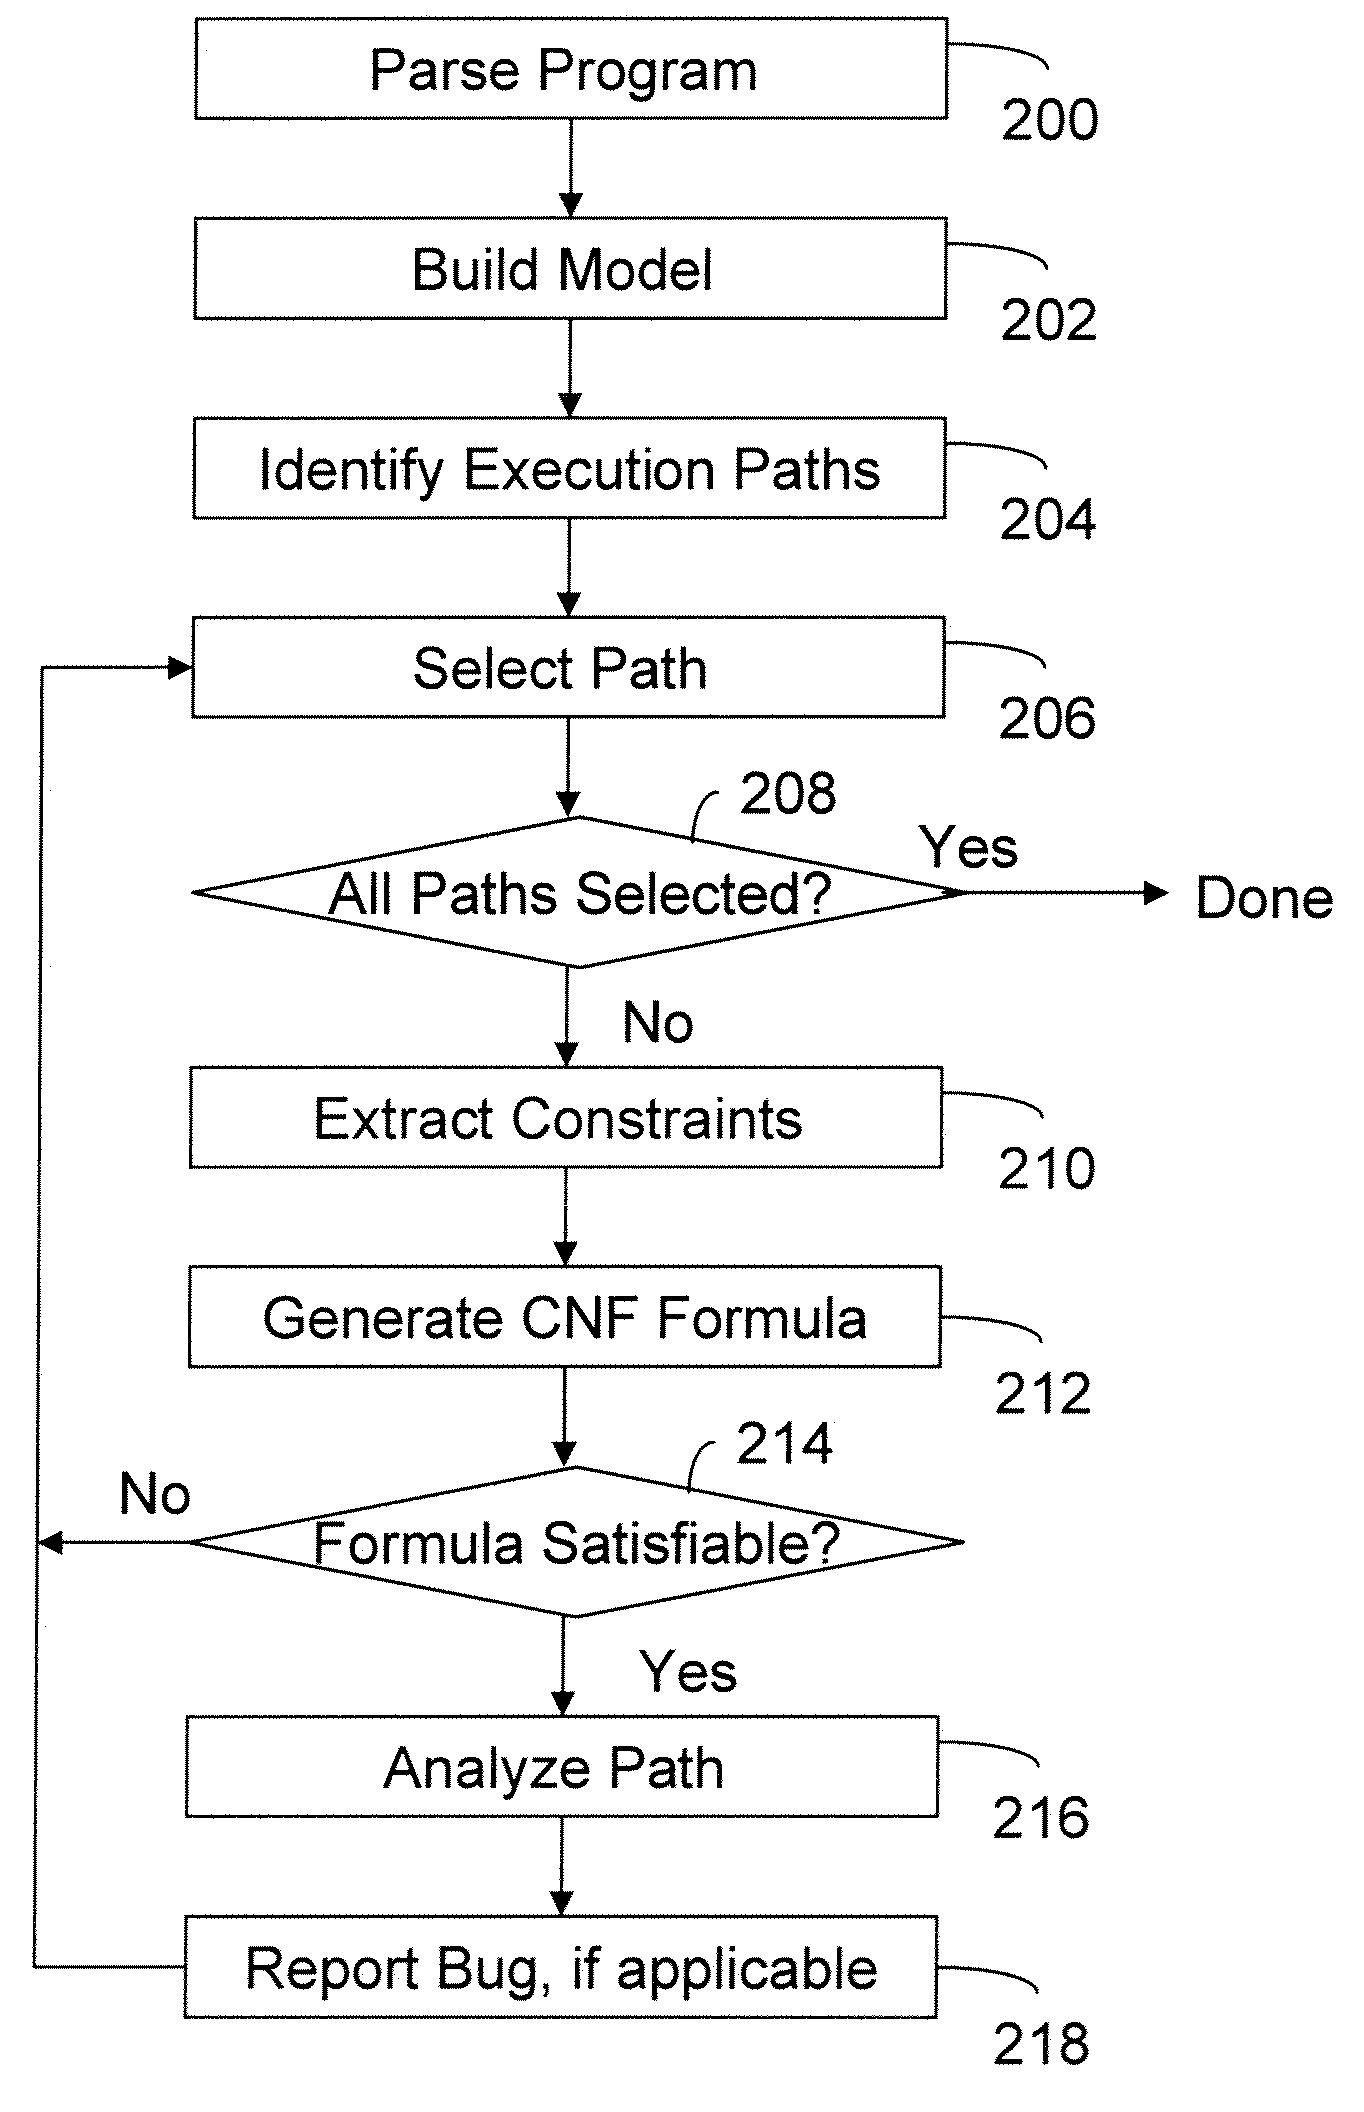 Apparatus and method for analyzing source code using path analysis and Boolean satisfiability